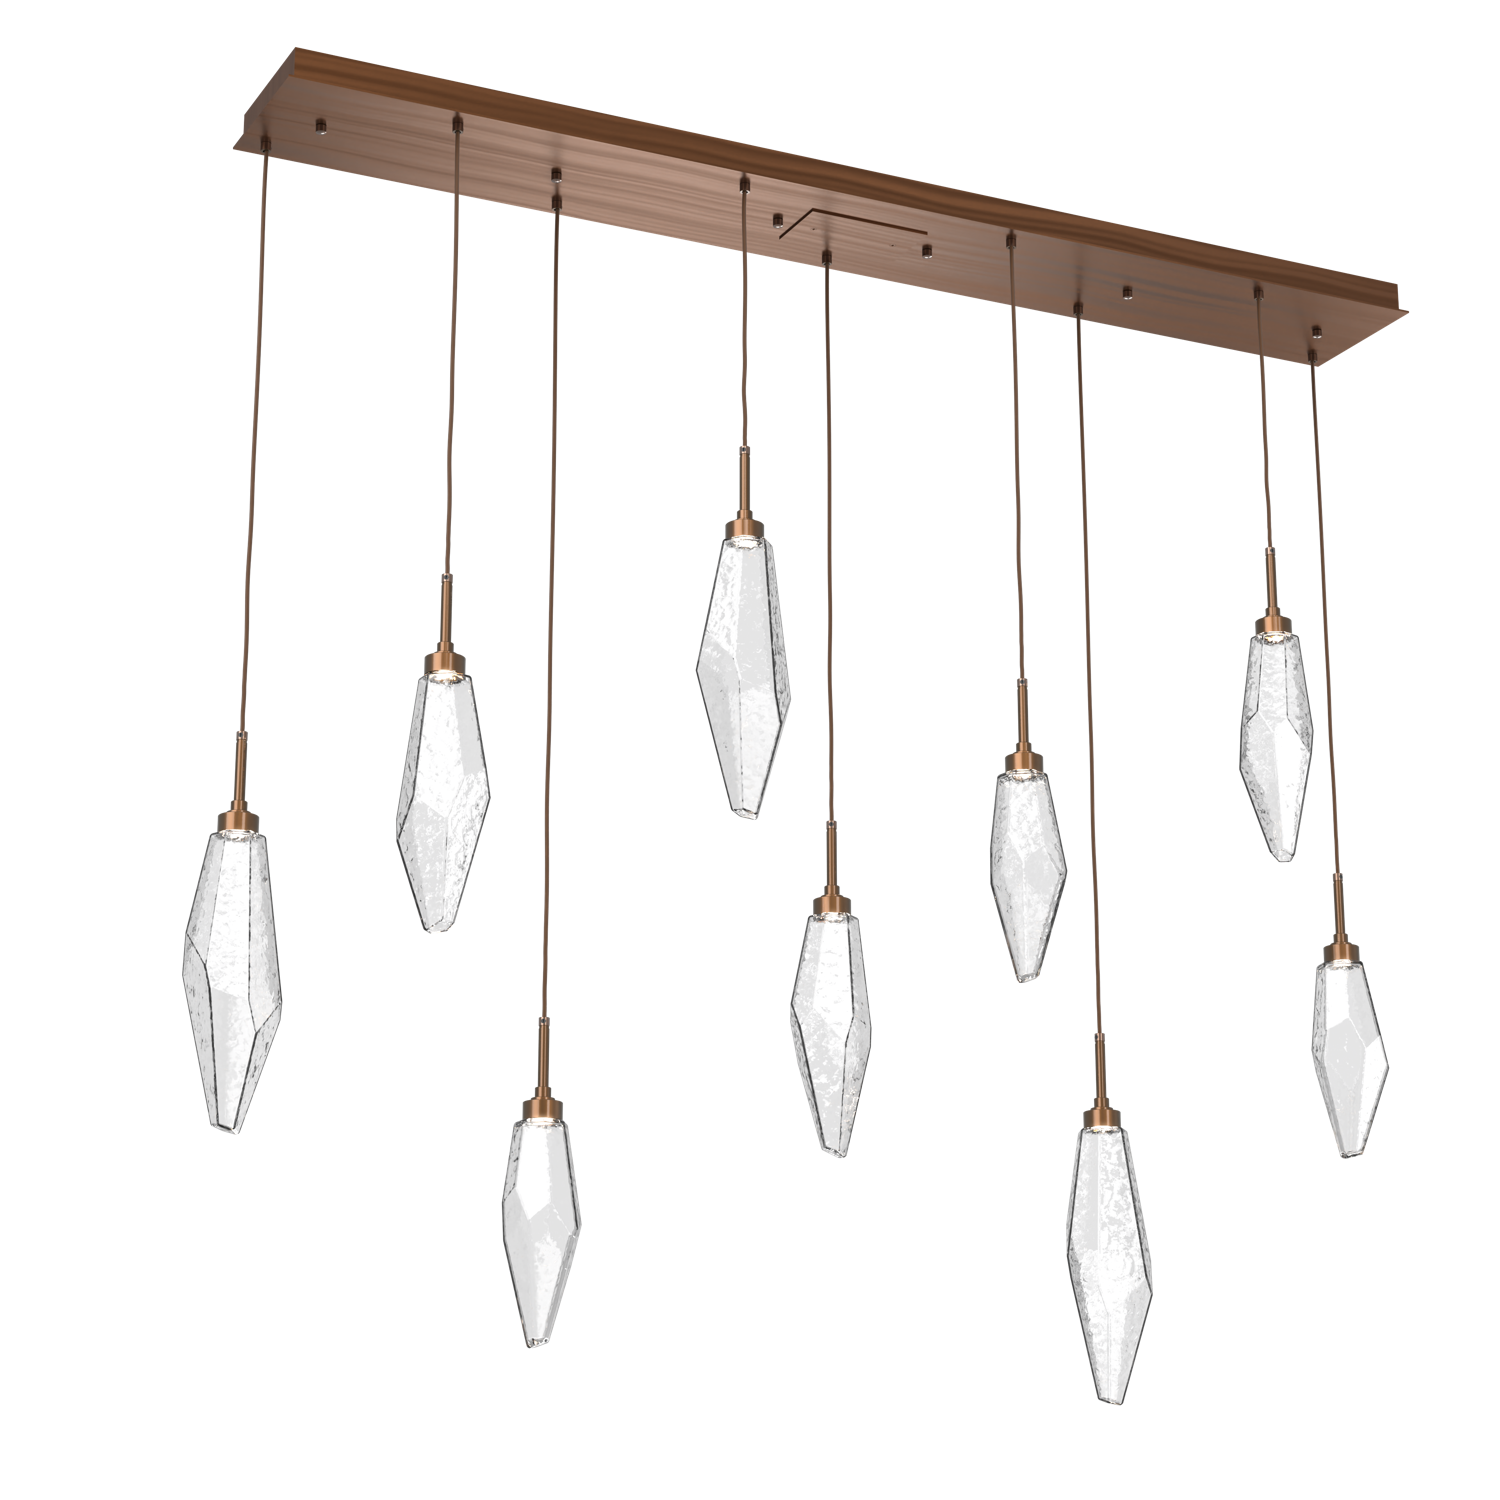 PLB0050-09-RB-CC-Hammerton-Studio-Rock-Crystal-9-light-linear-pendant-chandelier-with-oil-rubbed-bronze-finish-and-clear-glass-shades-and-LED-lamping